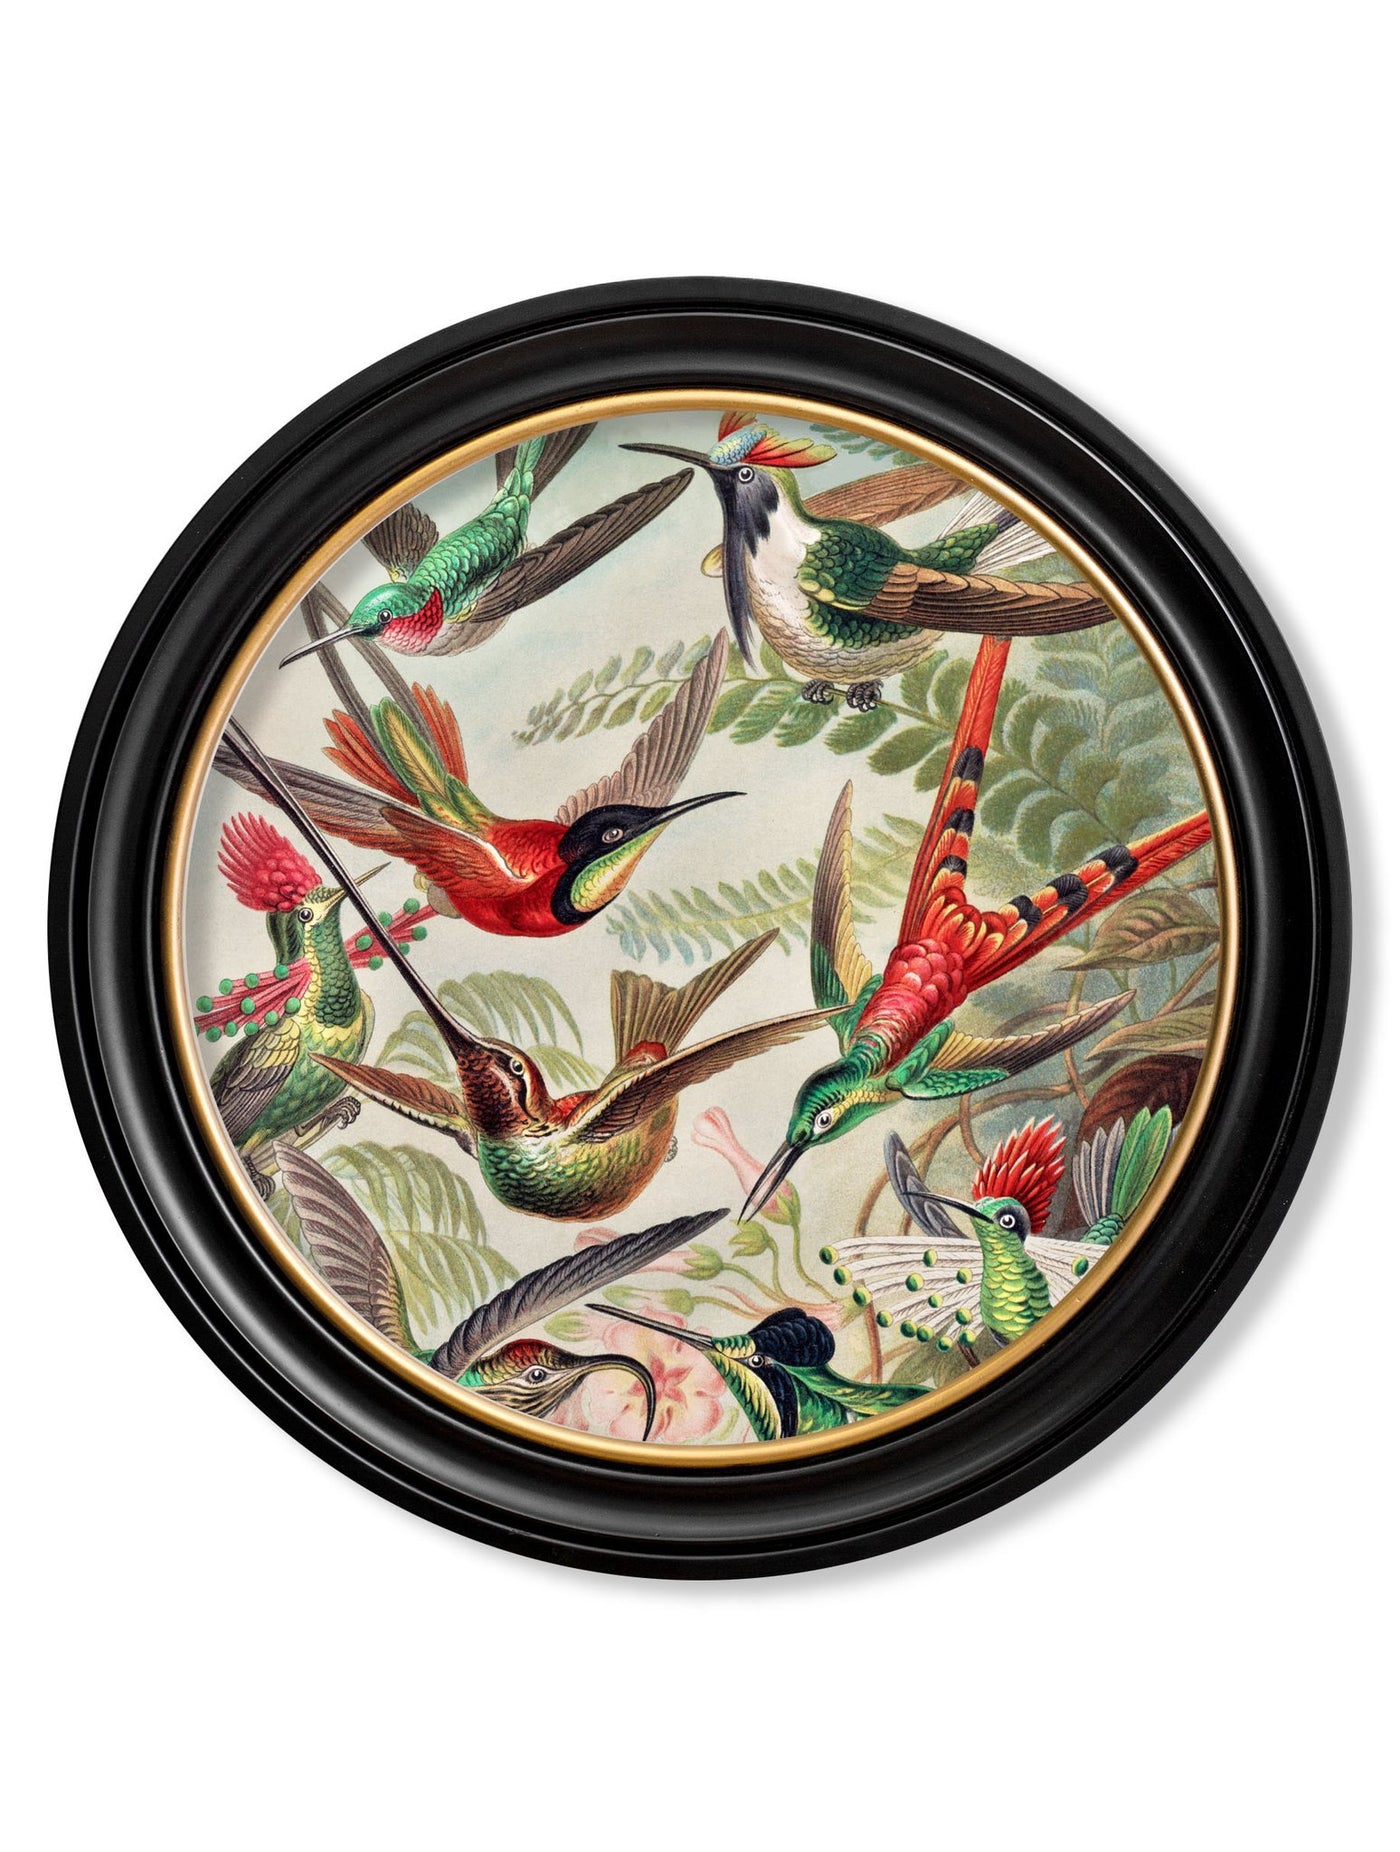 C.1904 HAECKEL FLORA AND FAUNA - ROUND FRAMES - TheArtistsQuarter